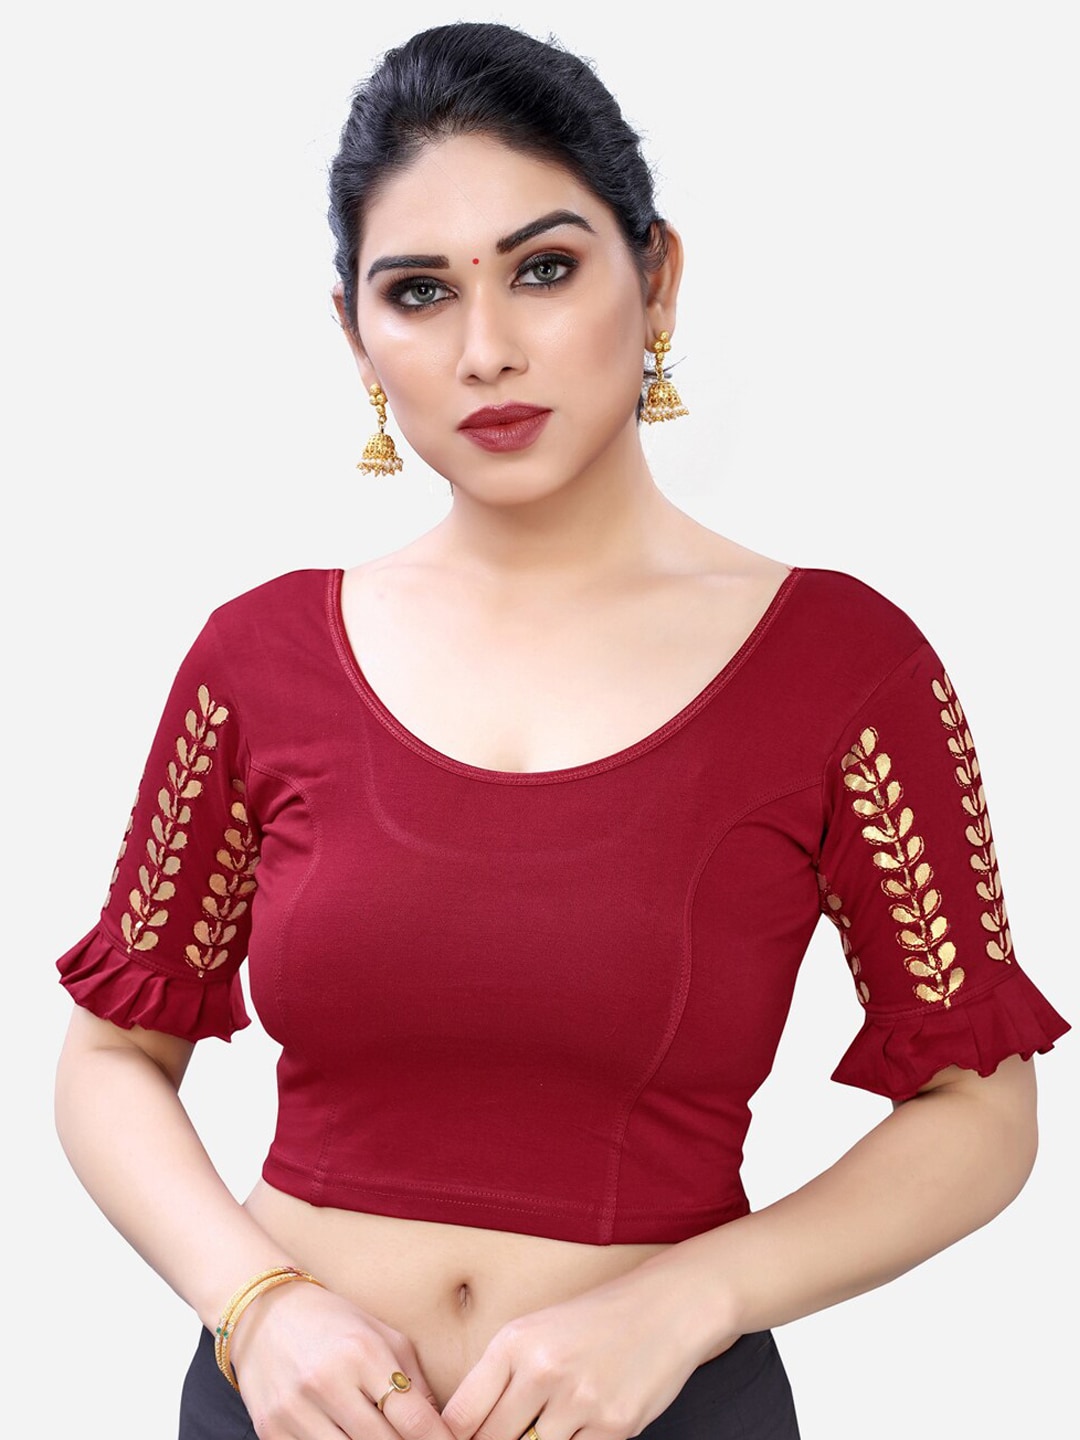 SIRIL Women Maroon Embroidered Saree Blouse Price in India